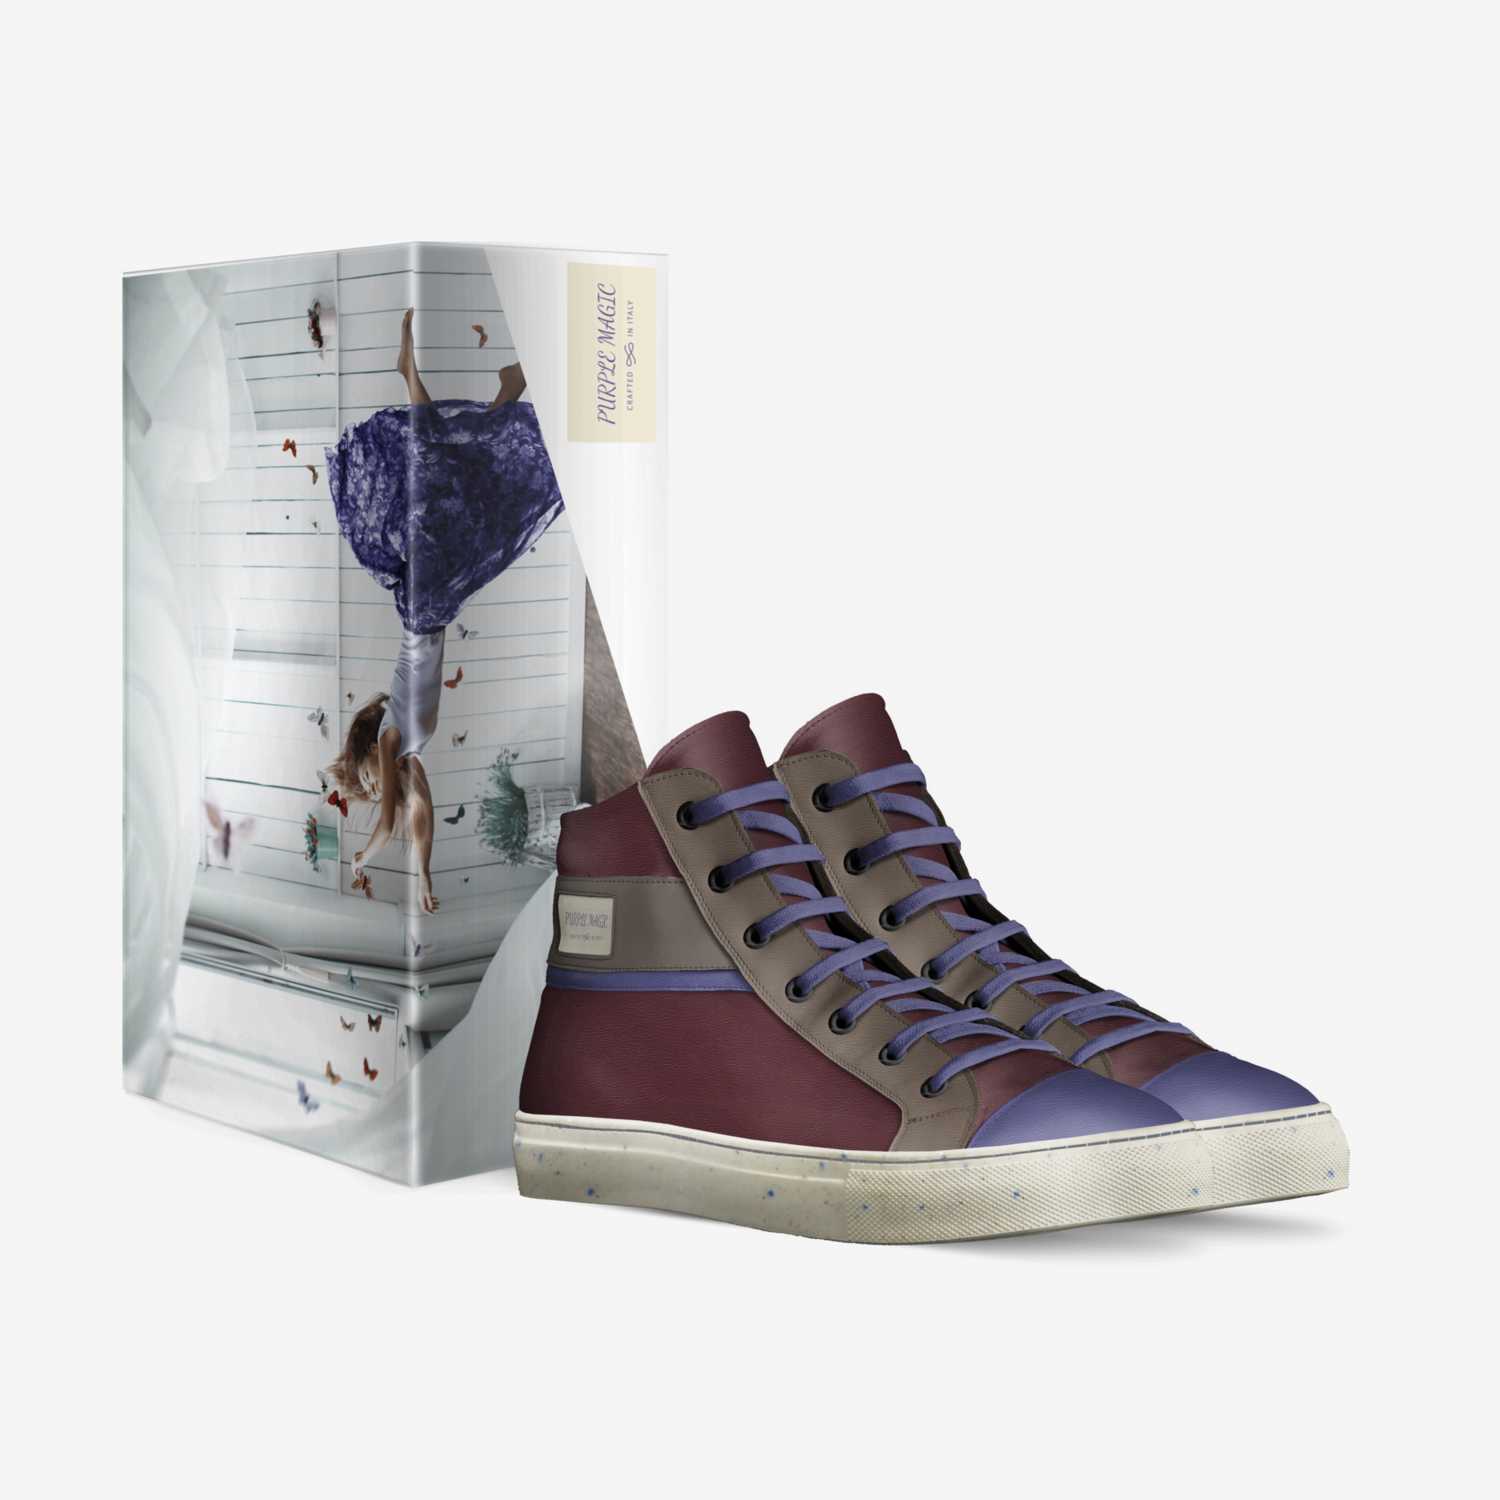 PURPLE MAGIC custom made in Italy shoes by Nadia Fabbietti | Box view